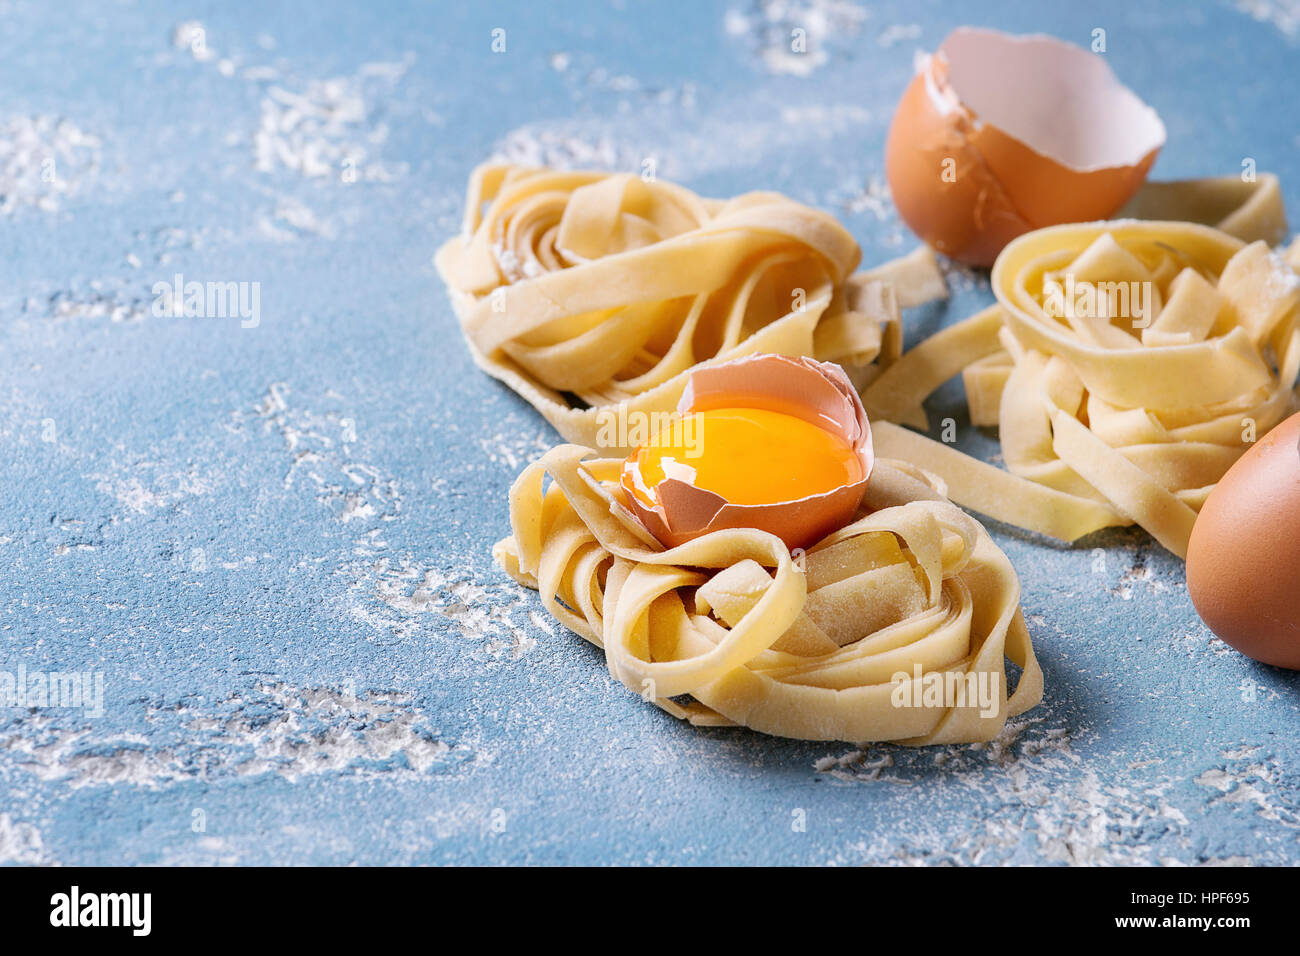 Fresh raw uncooked homemade twisted pasta tagliatelle with egg yolk, shell and pasta cutter over light blue concrete background. Stock Photo